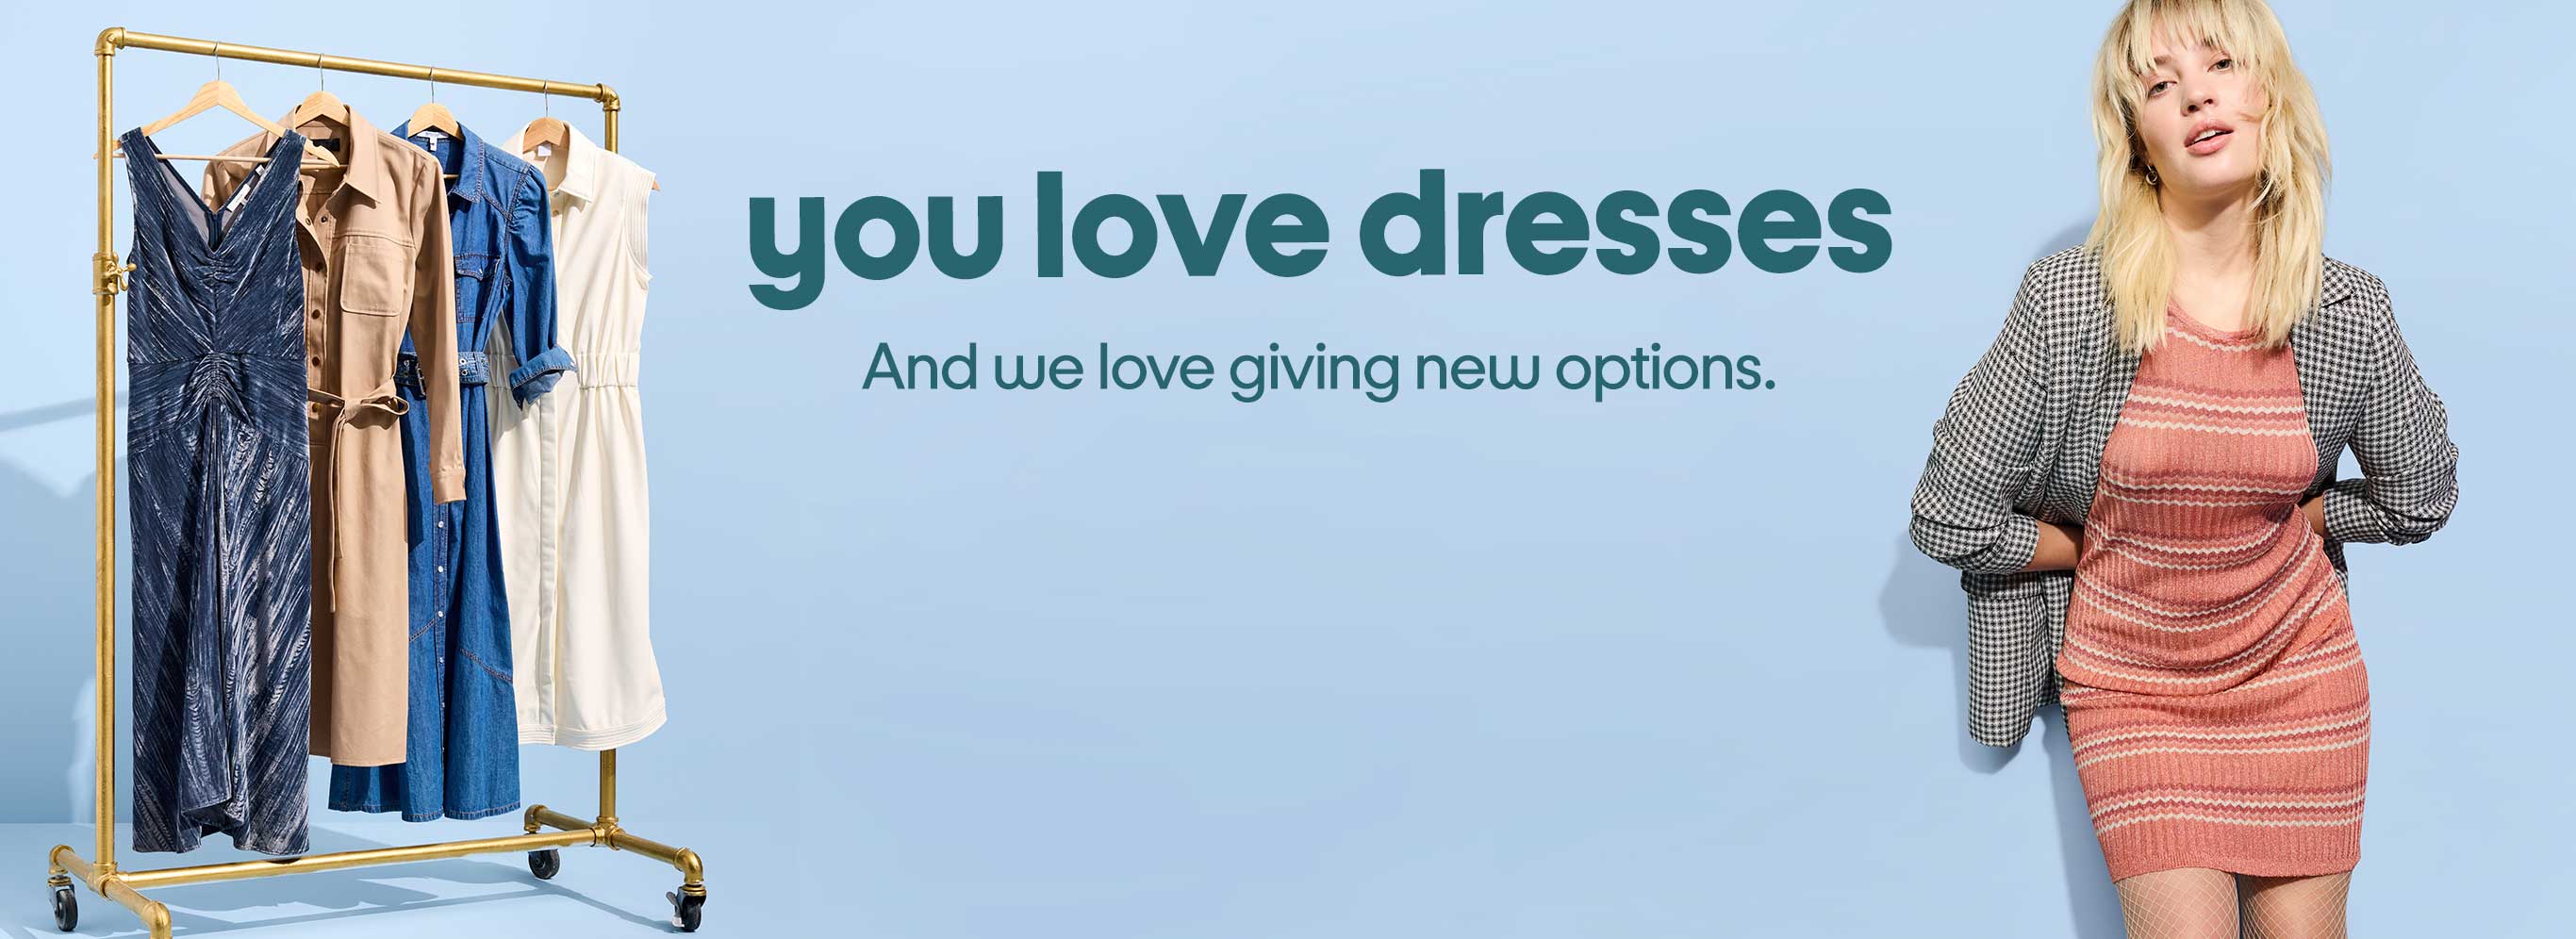 You love dresses. And we love giving new options.